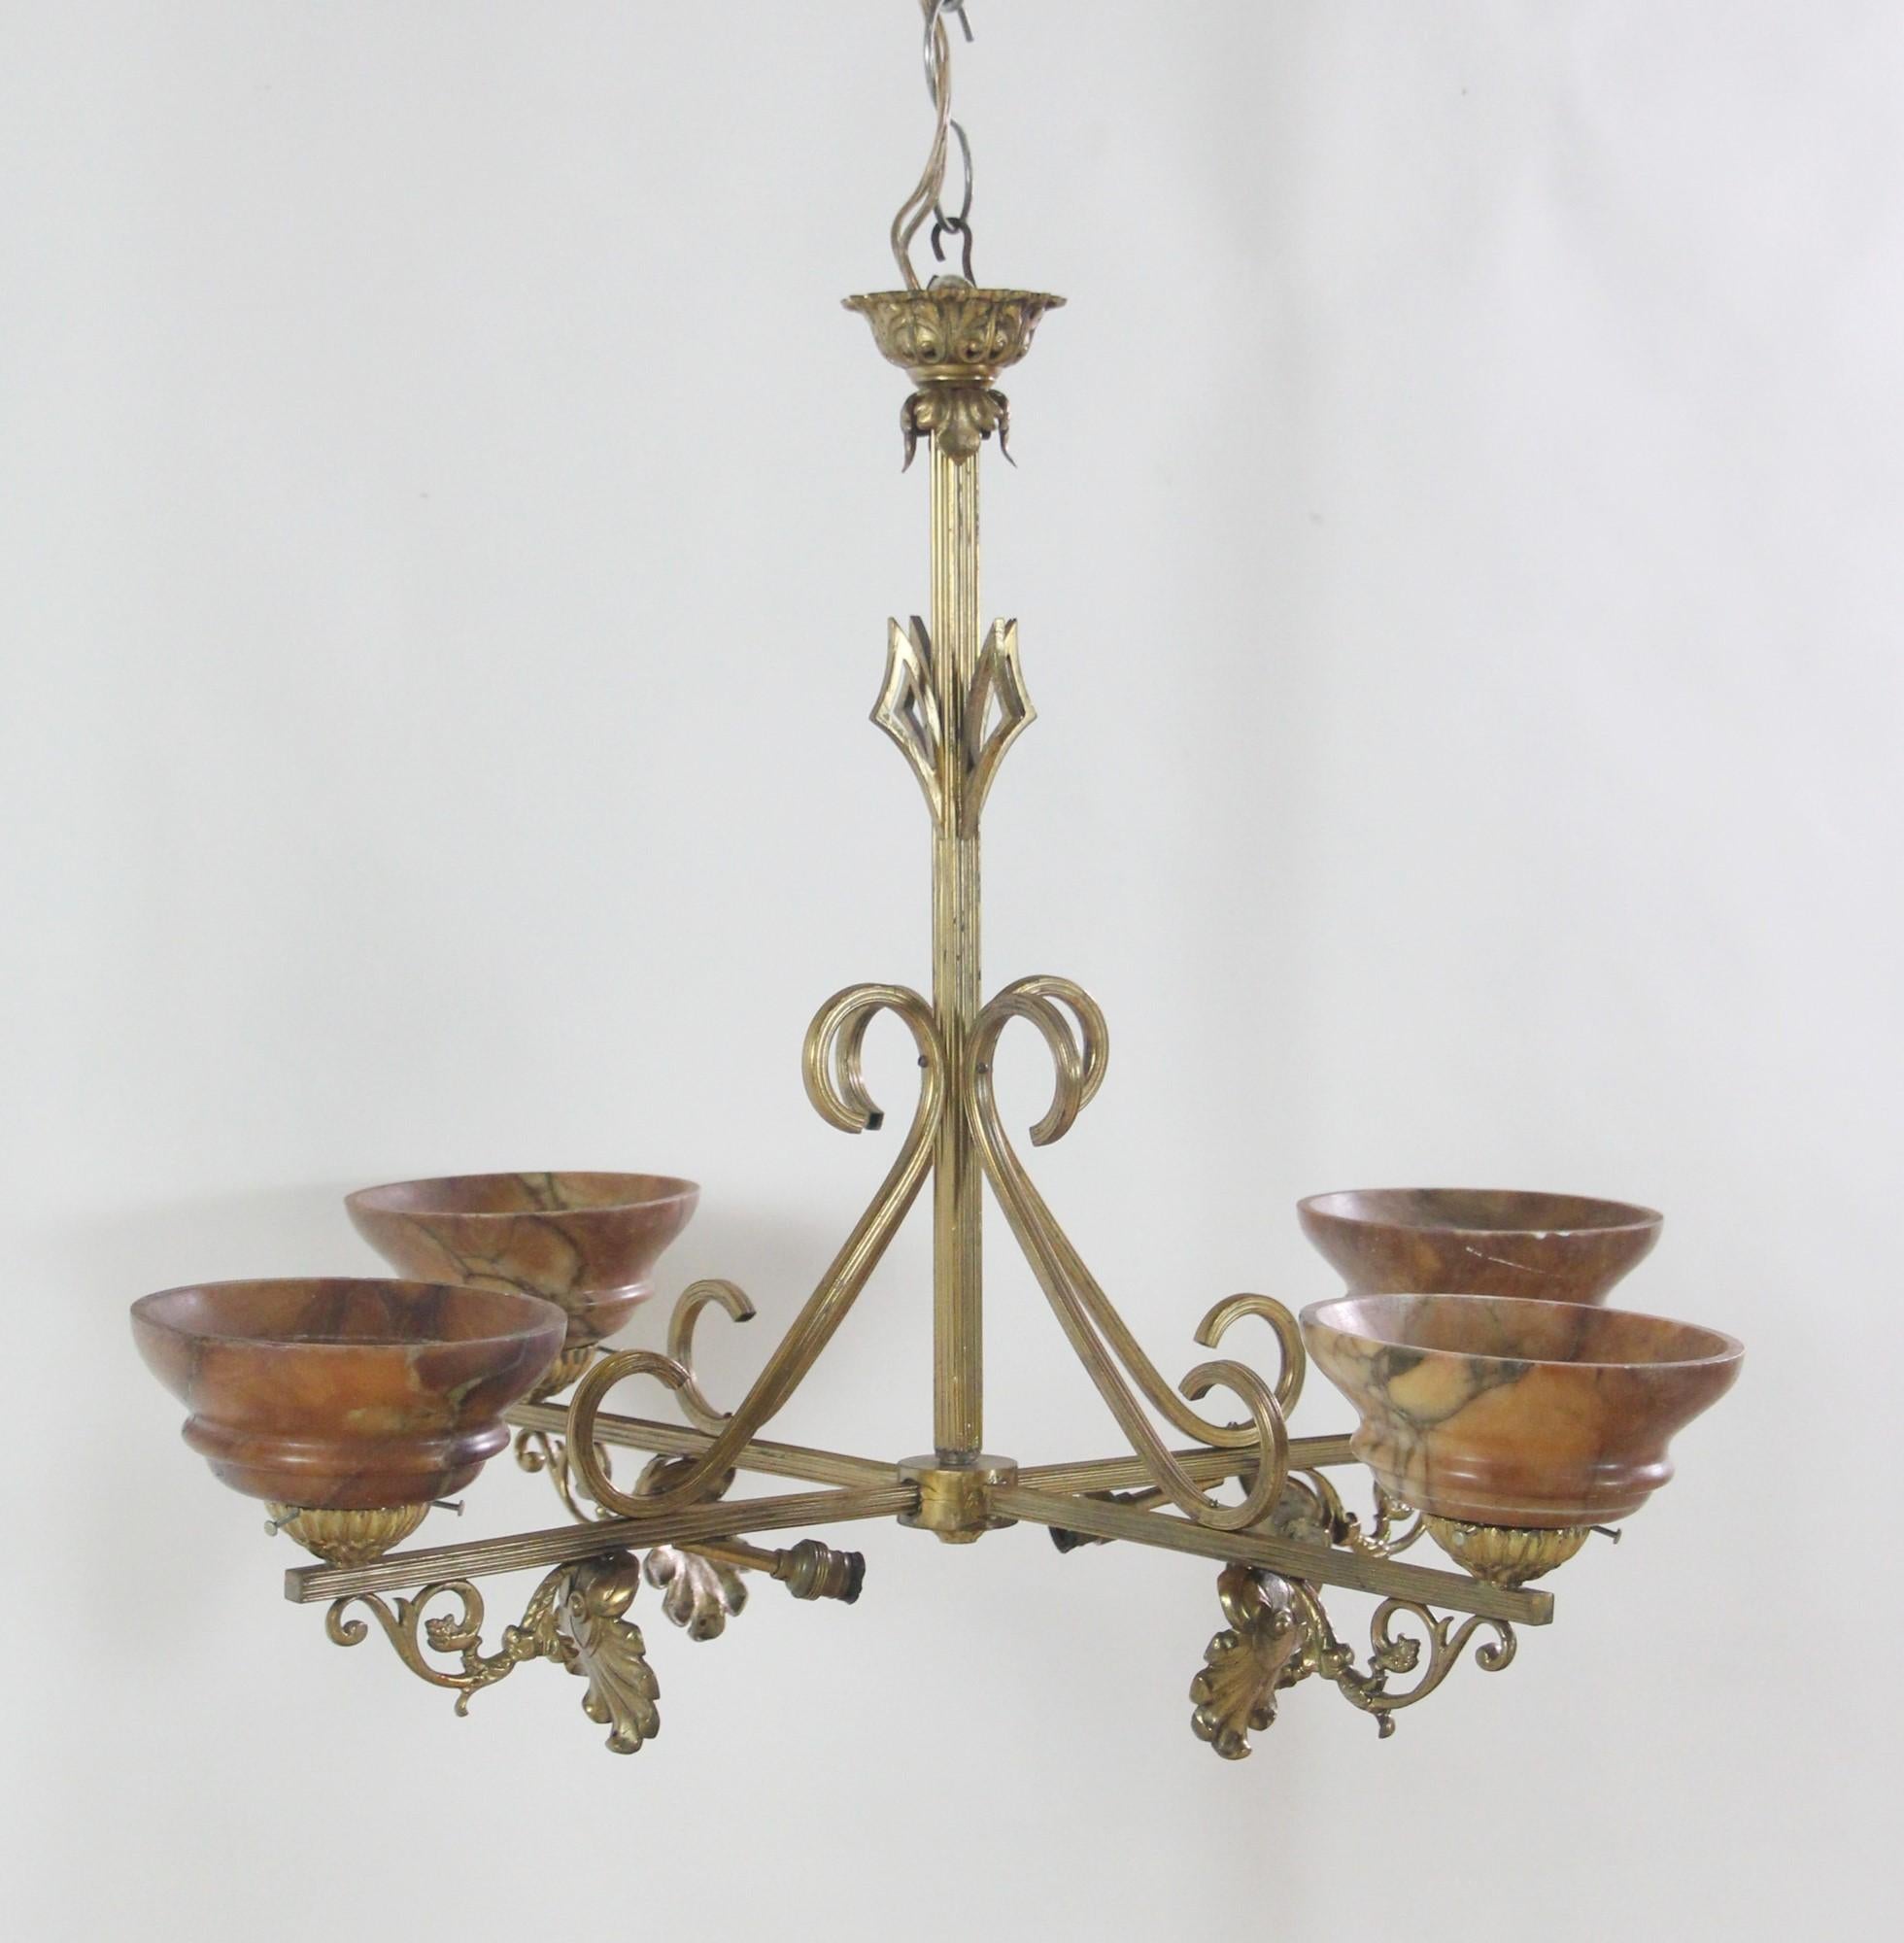 Antique brass chandelier with four arms featuring leaf design and burgundy alabaster shades. This French light is circa 1920s and has an elegant design. Price includes rewiring. This can be seen at our 400 Gilligan St location in Scranton, PA.

 